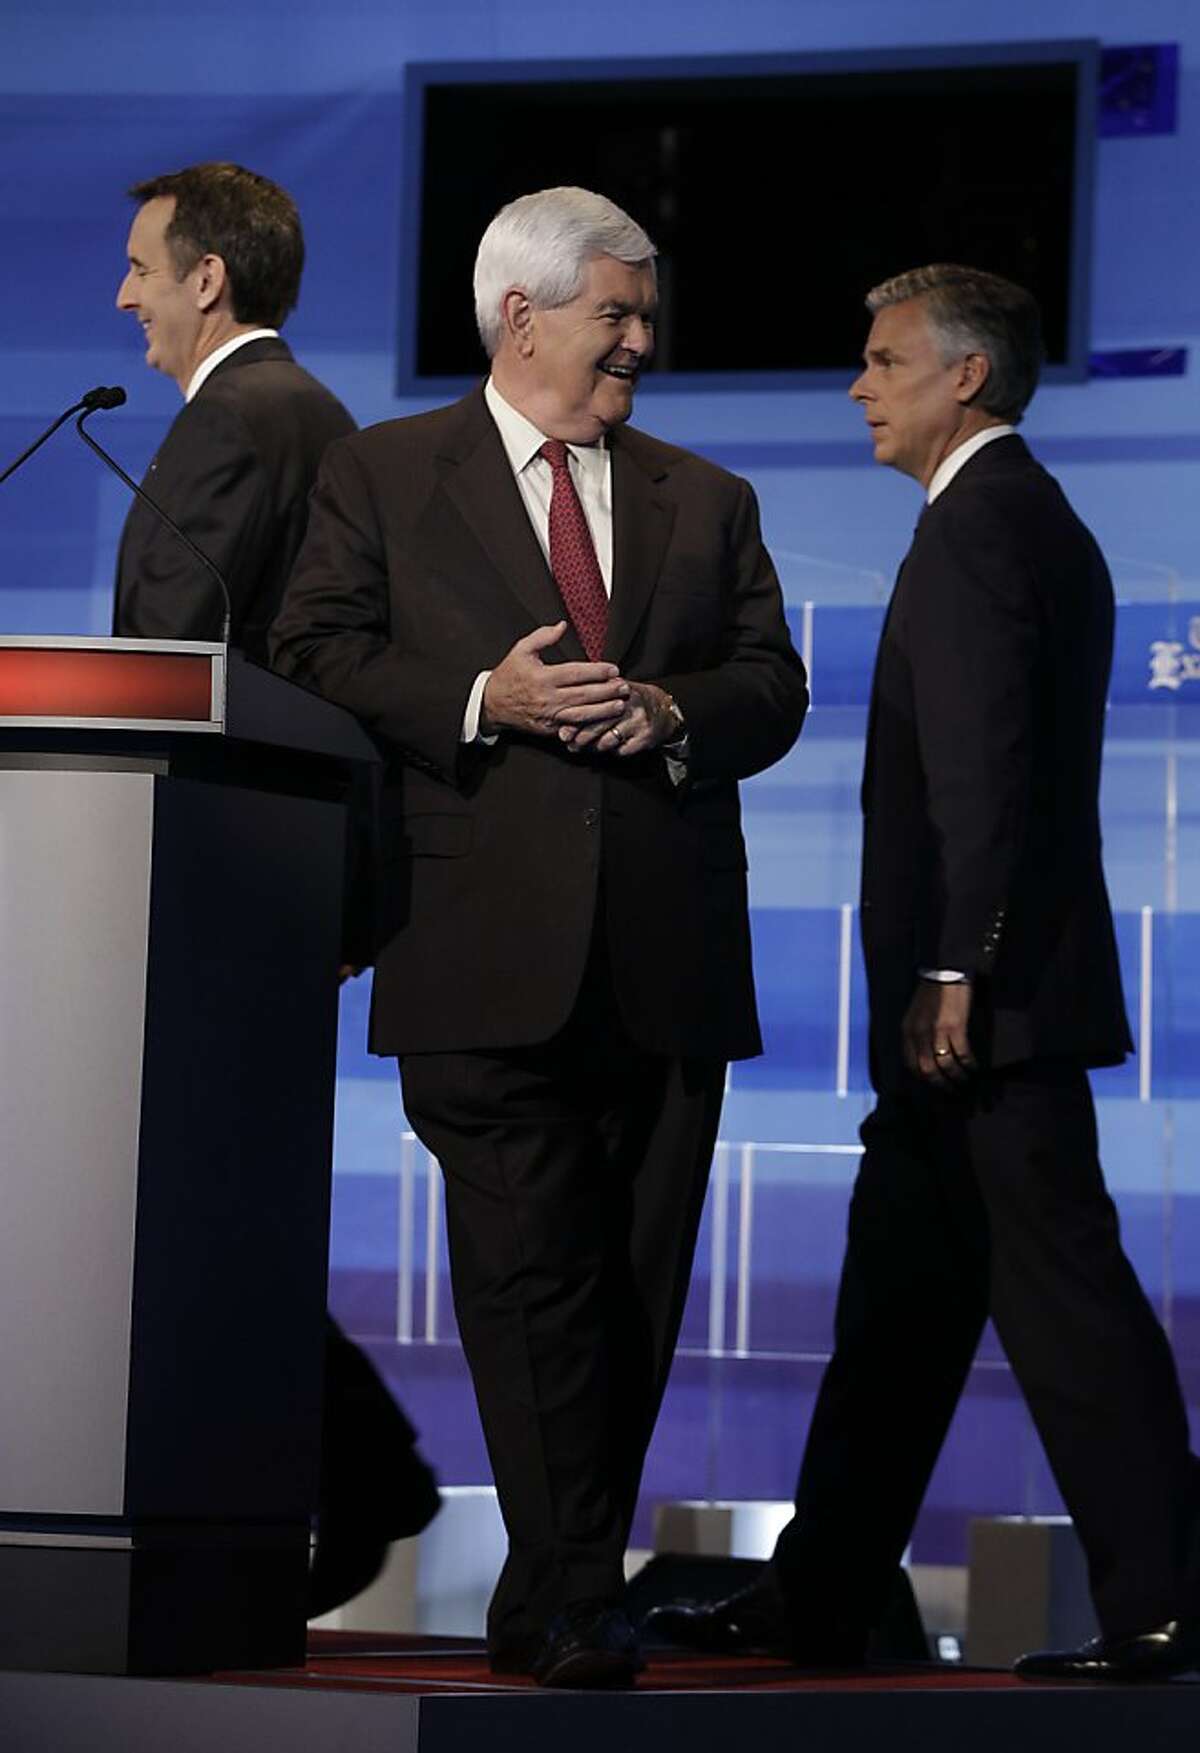 Republican presidential candidates former Minnesota Governor Tim Pawlenty (L),, former House Speaker Newt Gingrich (C), former Utah Gov. Jon Huntsman (R) are pictured at the end of a commerical break during the Iowa GOP/Fox News Debate at the CY Stephens Auditorium in Ames, Iowa, on Thursday, August 11, 2011. Republican White House hopefuls flooded the farm state of Iowa for a closely-watched debate and straw poll which could weed out the crop of 2012 challengers to US President Barack Obama. AFP PHOTO / Pool / Charlie Neibergall (Photo credit should read Charlie Neibergall/AFP/Getty Images)